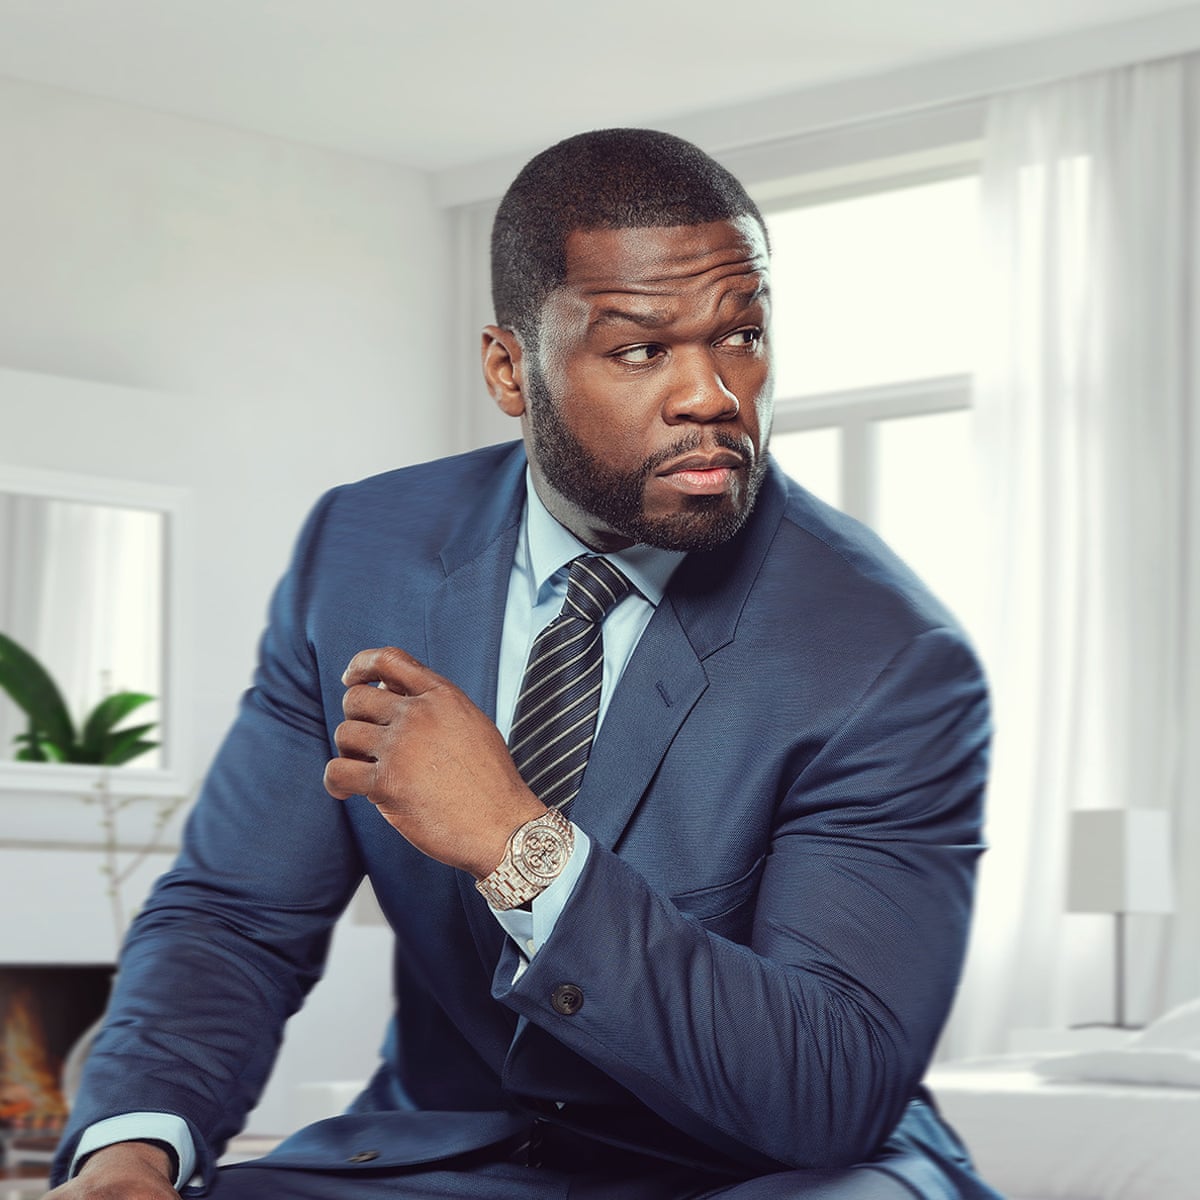 50 Cent On Love Cash And Bankruptcy When There Are Setbacks There Will Be Get Backs 50 Cent The Guardian